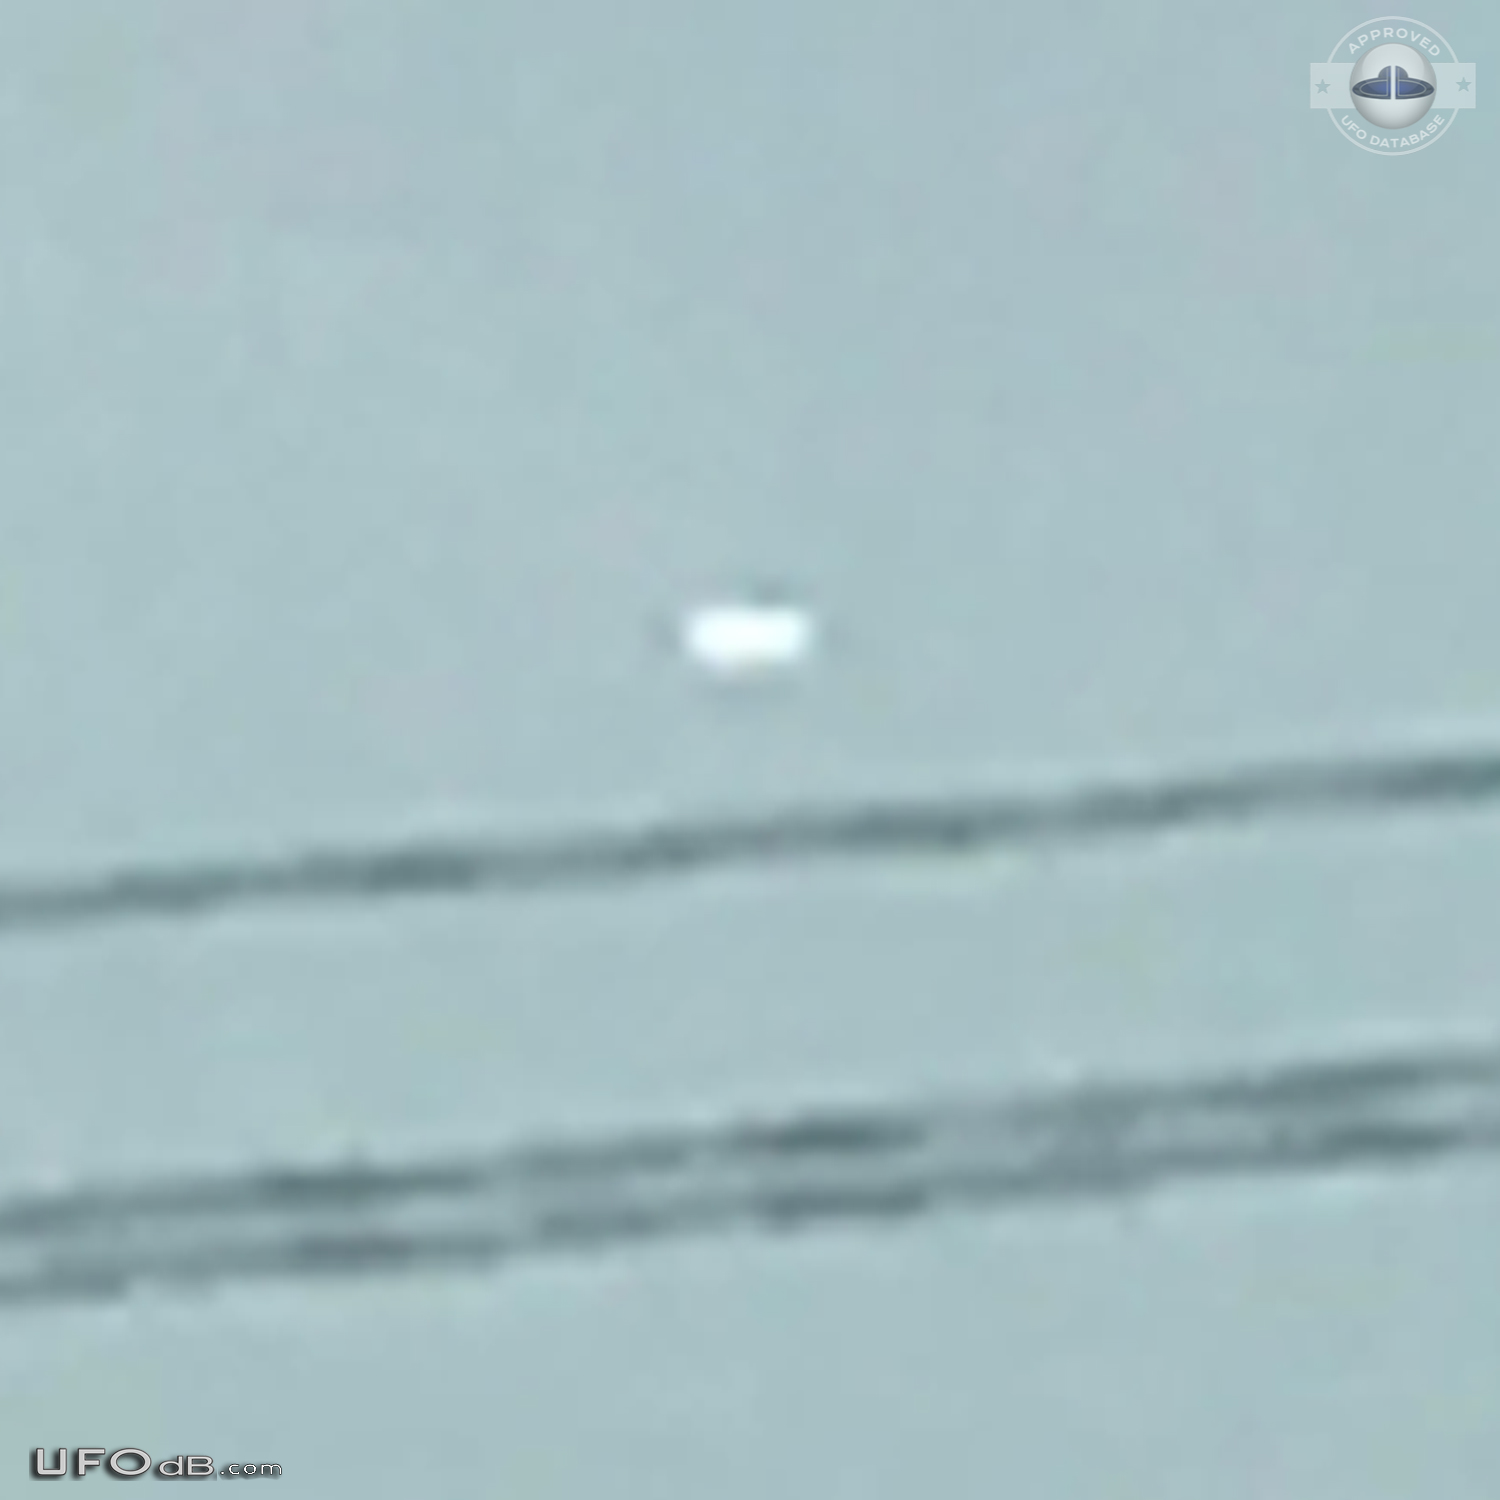 Shiny UFO stopped in the sky and quickly moved near Benson Arizona USA UFO Picture #846-4